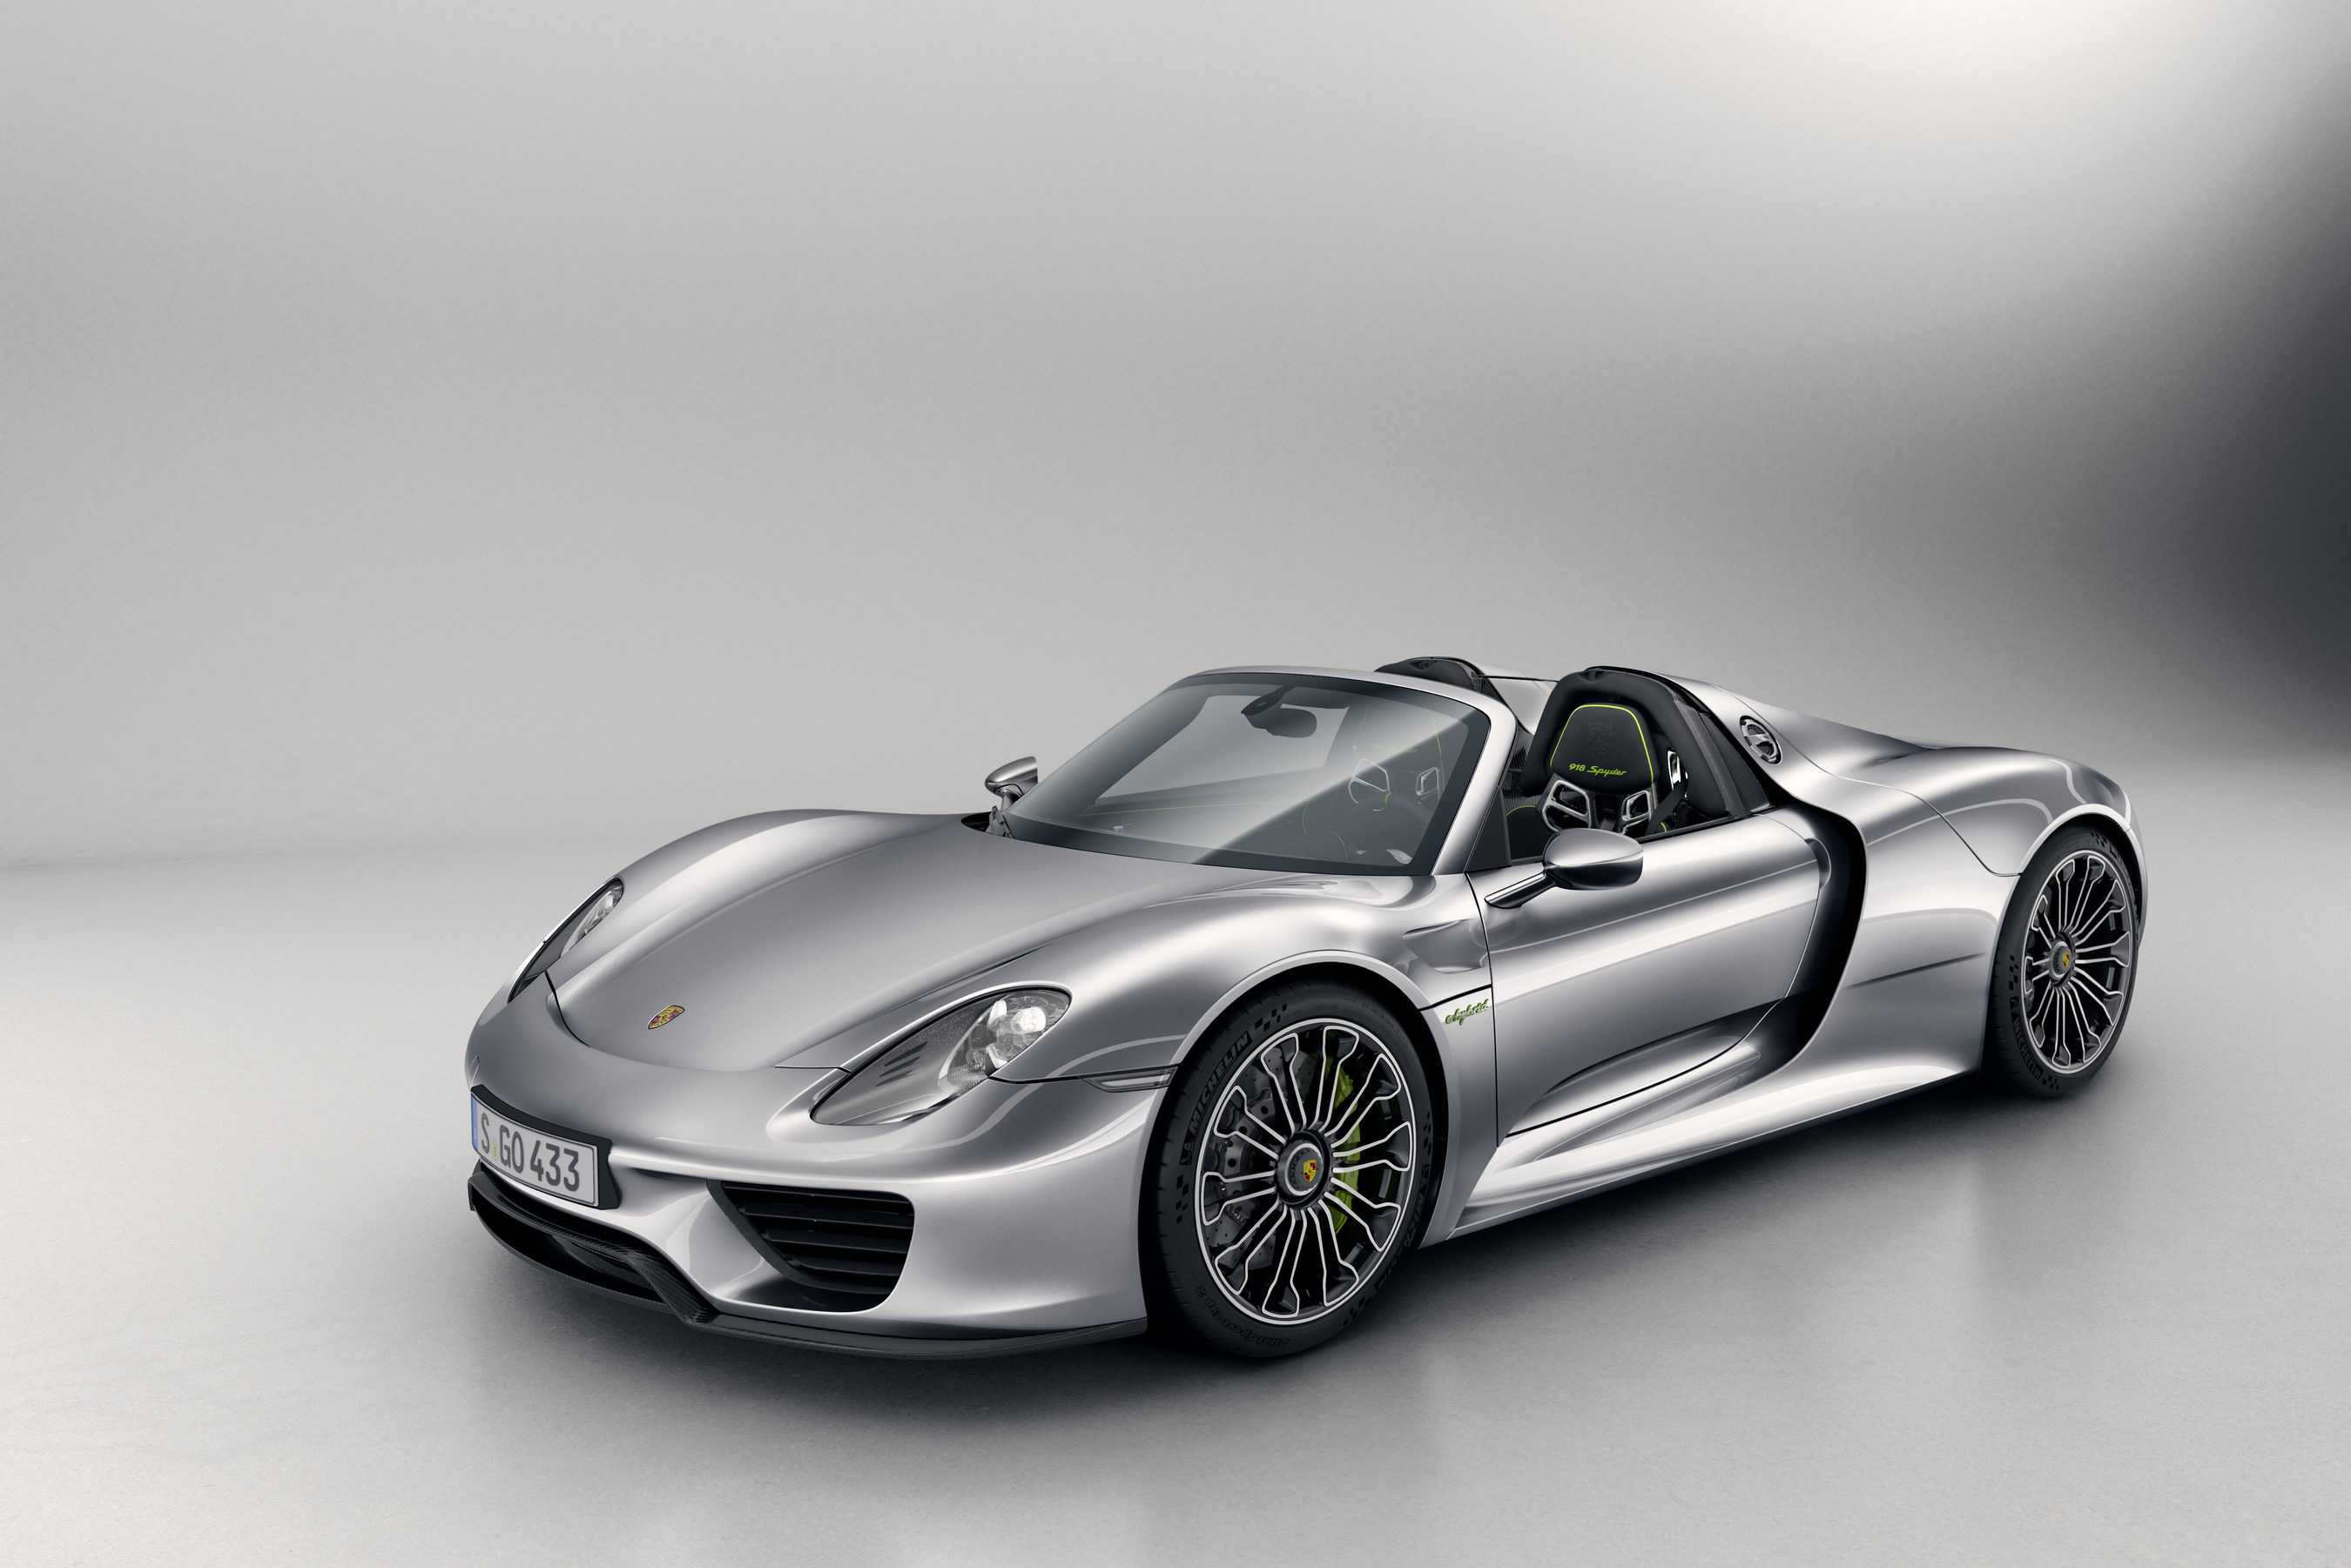 Robb Report Selects The Porsche 918 Spyder As Its 2015 Car Of The Year